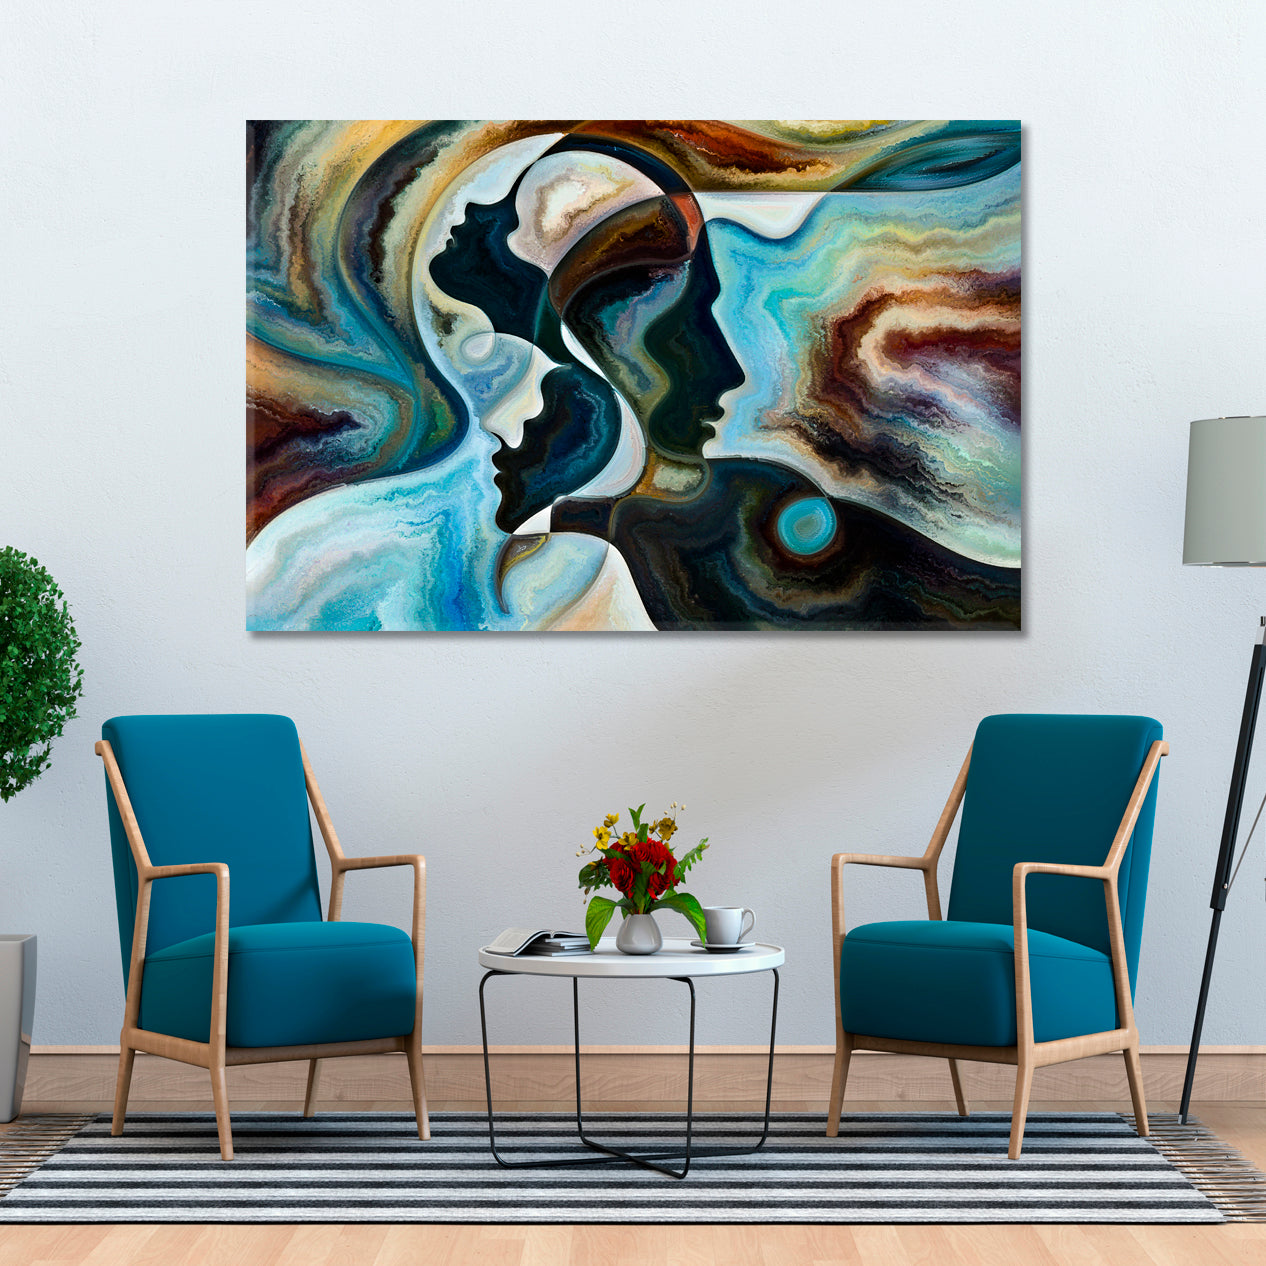 UNITY AND BIRTH OF LIFE Modern Abstract Painting Consciousness Art Artesty   